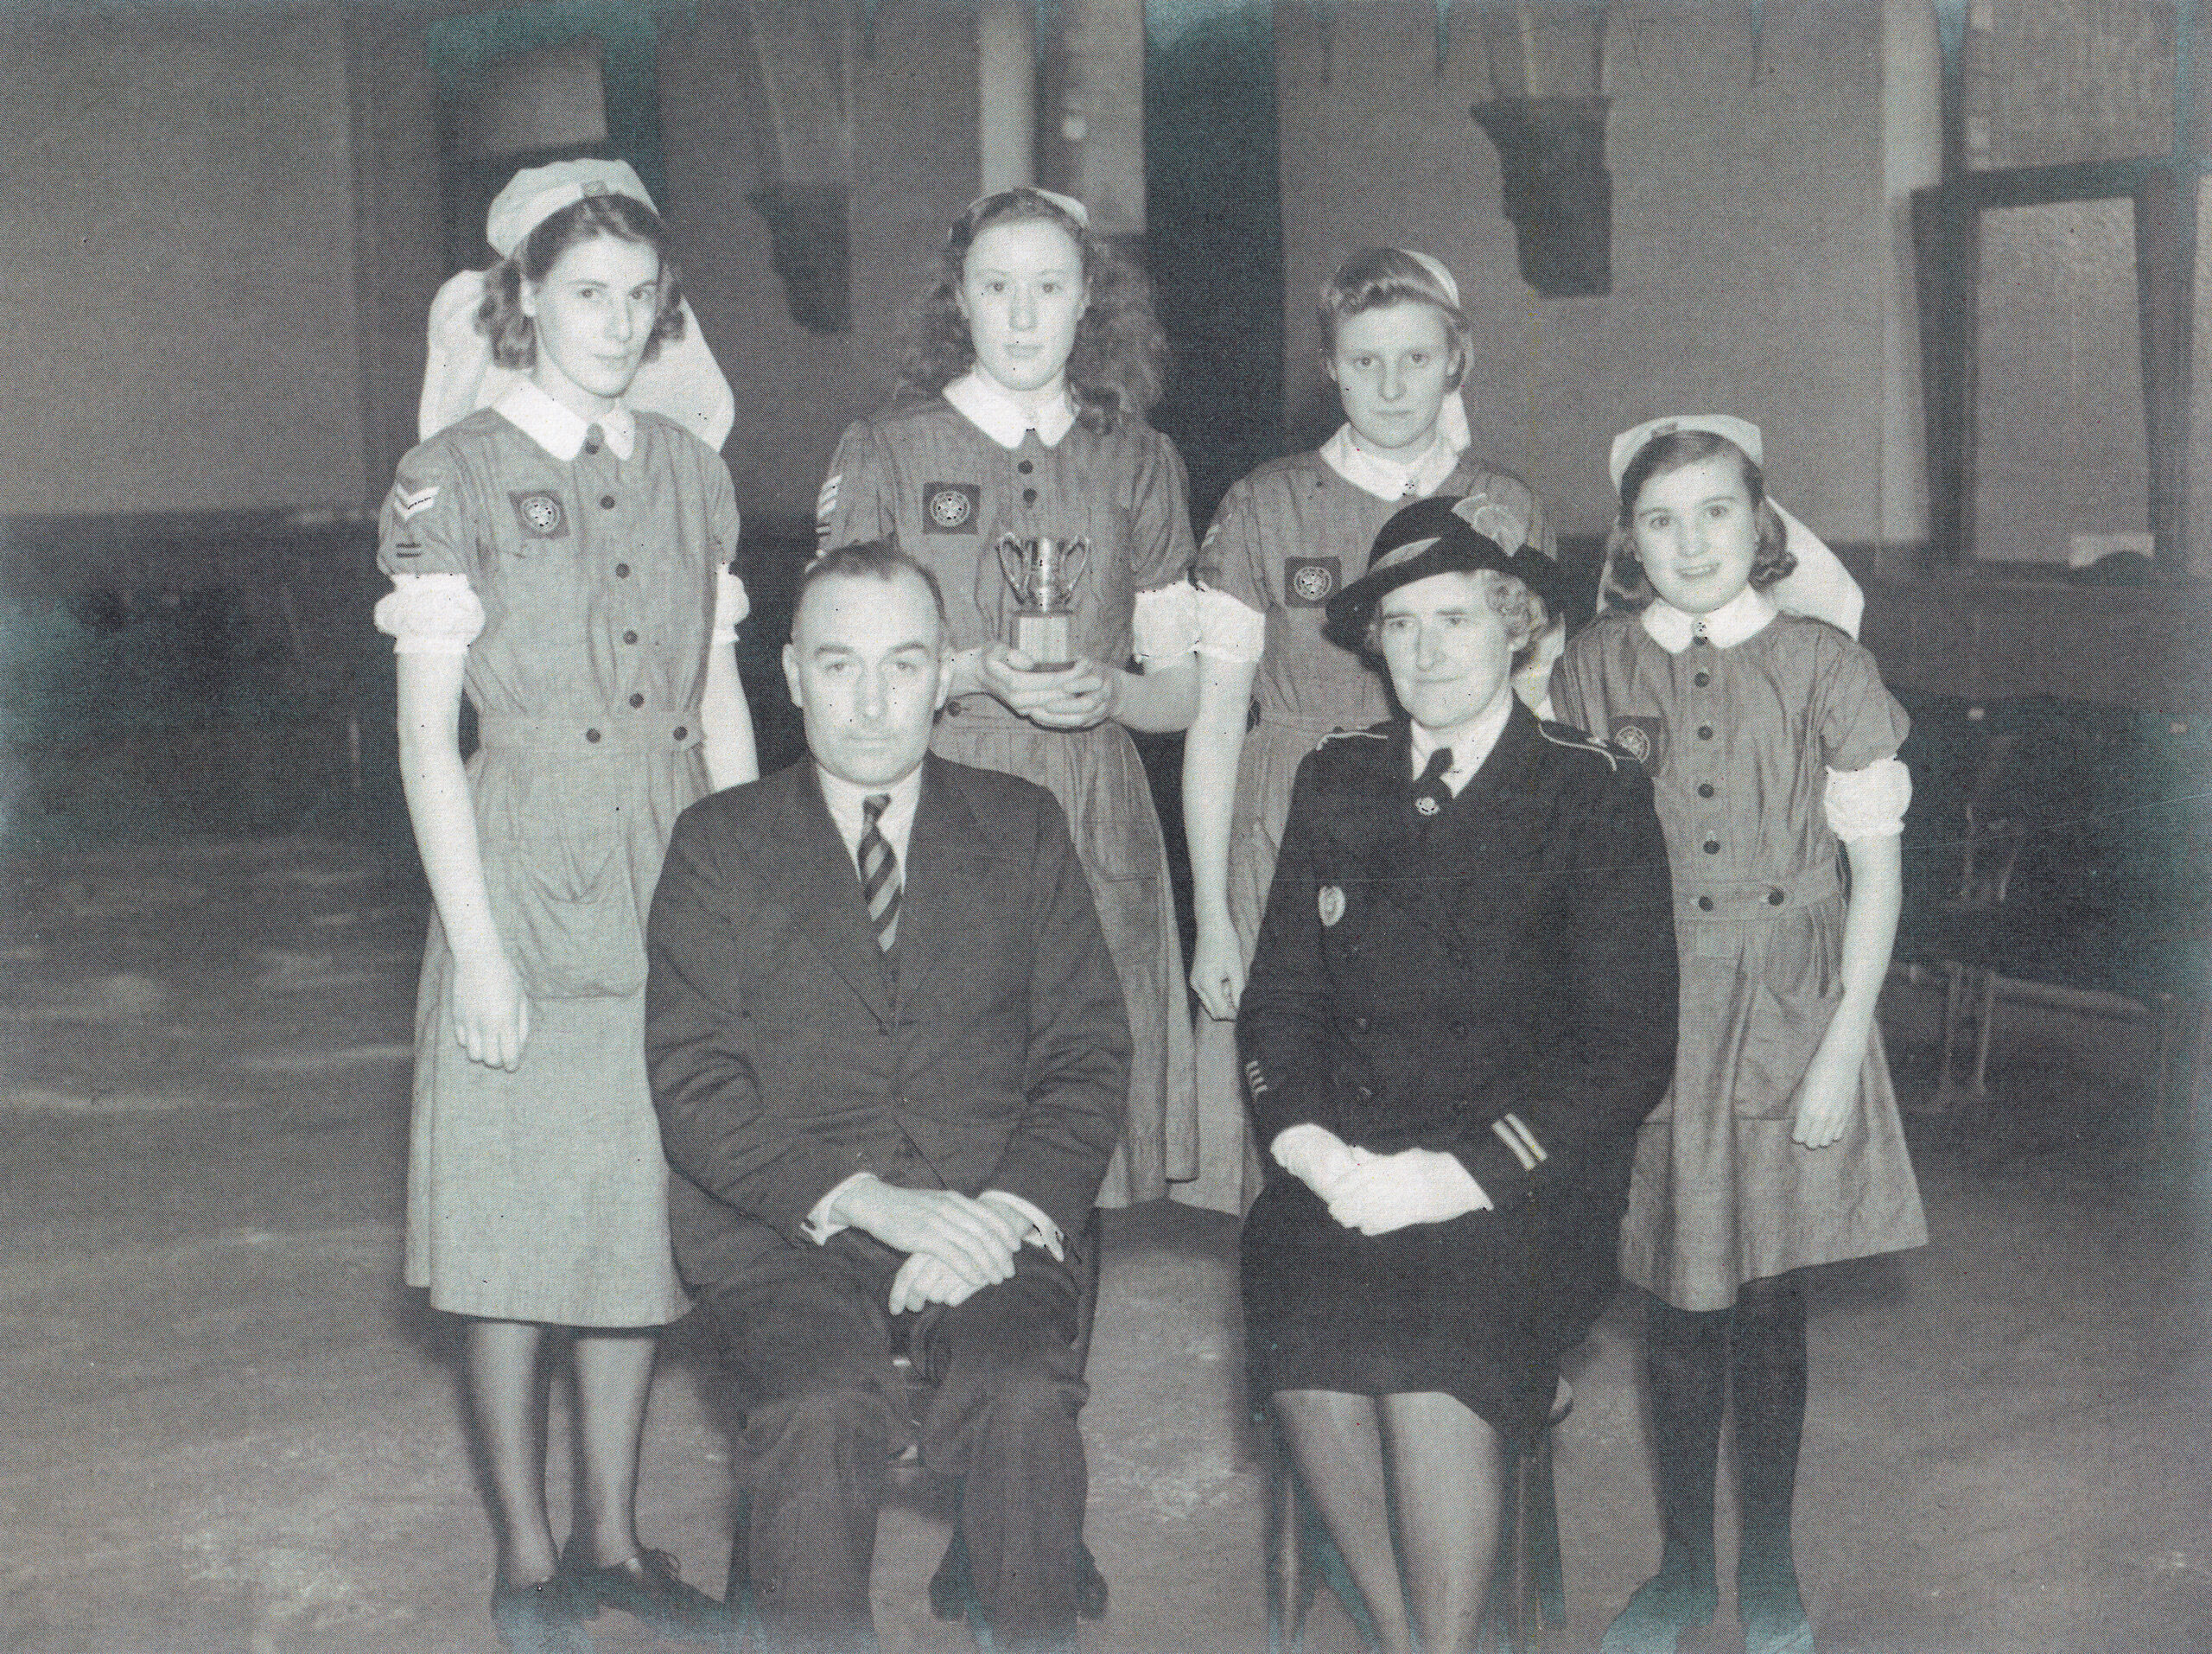 Black and white photograph of four female Cadets standing in a room behind two adults